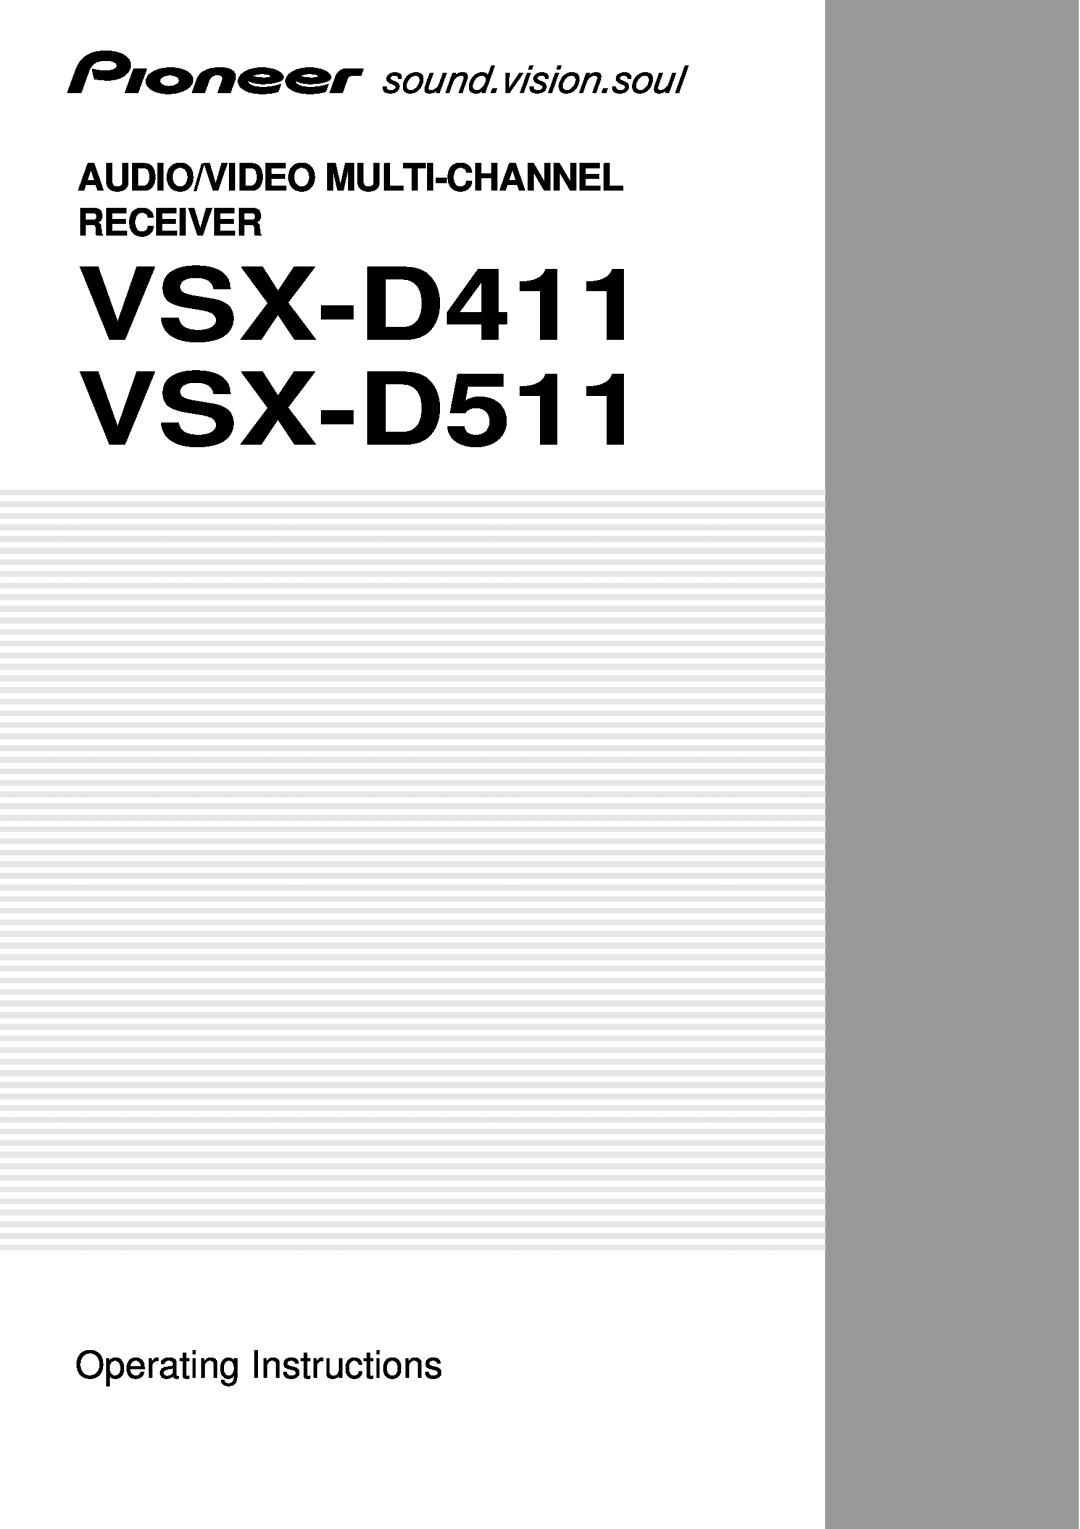 Pioneer operating instructions VSX-D411 VSX-D511, Audio/Video Multi-Channelreceiver, Operating Instructions 